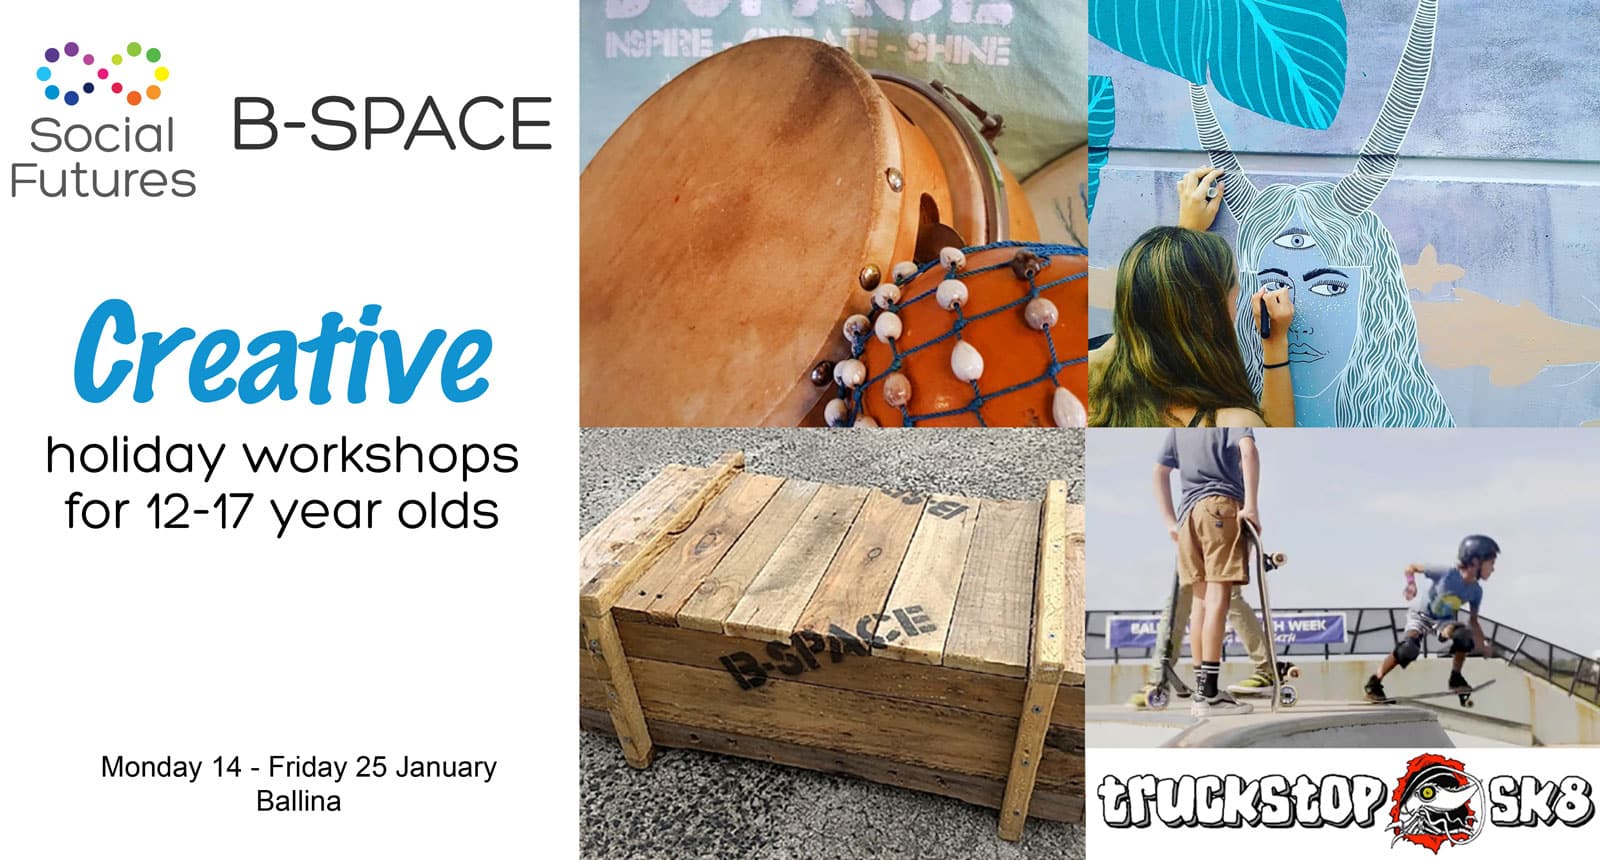 Ballina Holiday Workshops For 12 17 Year Olds At B Space